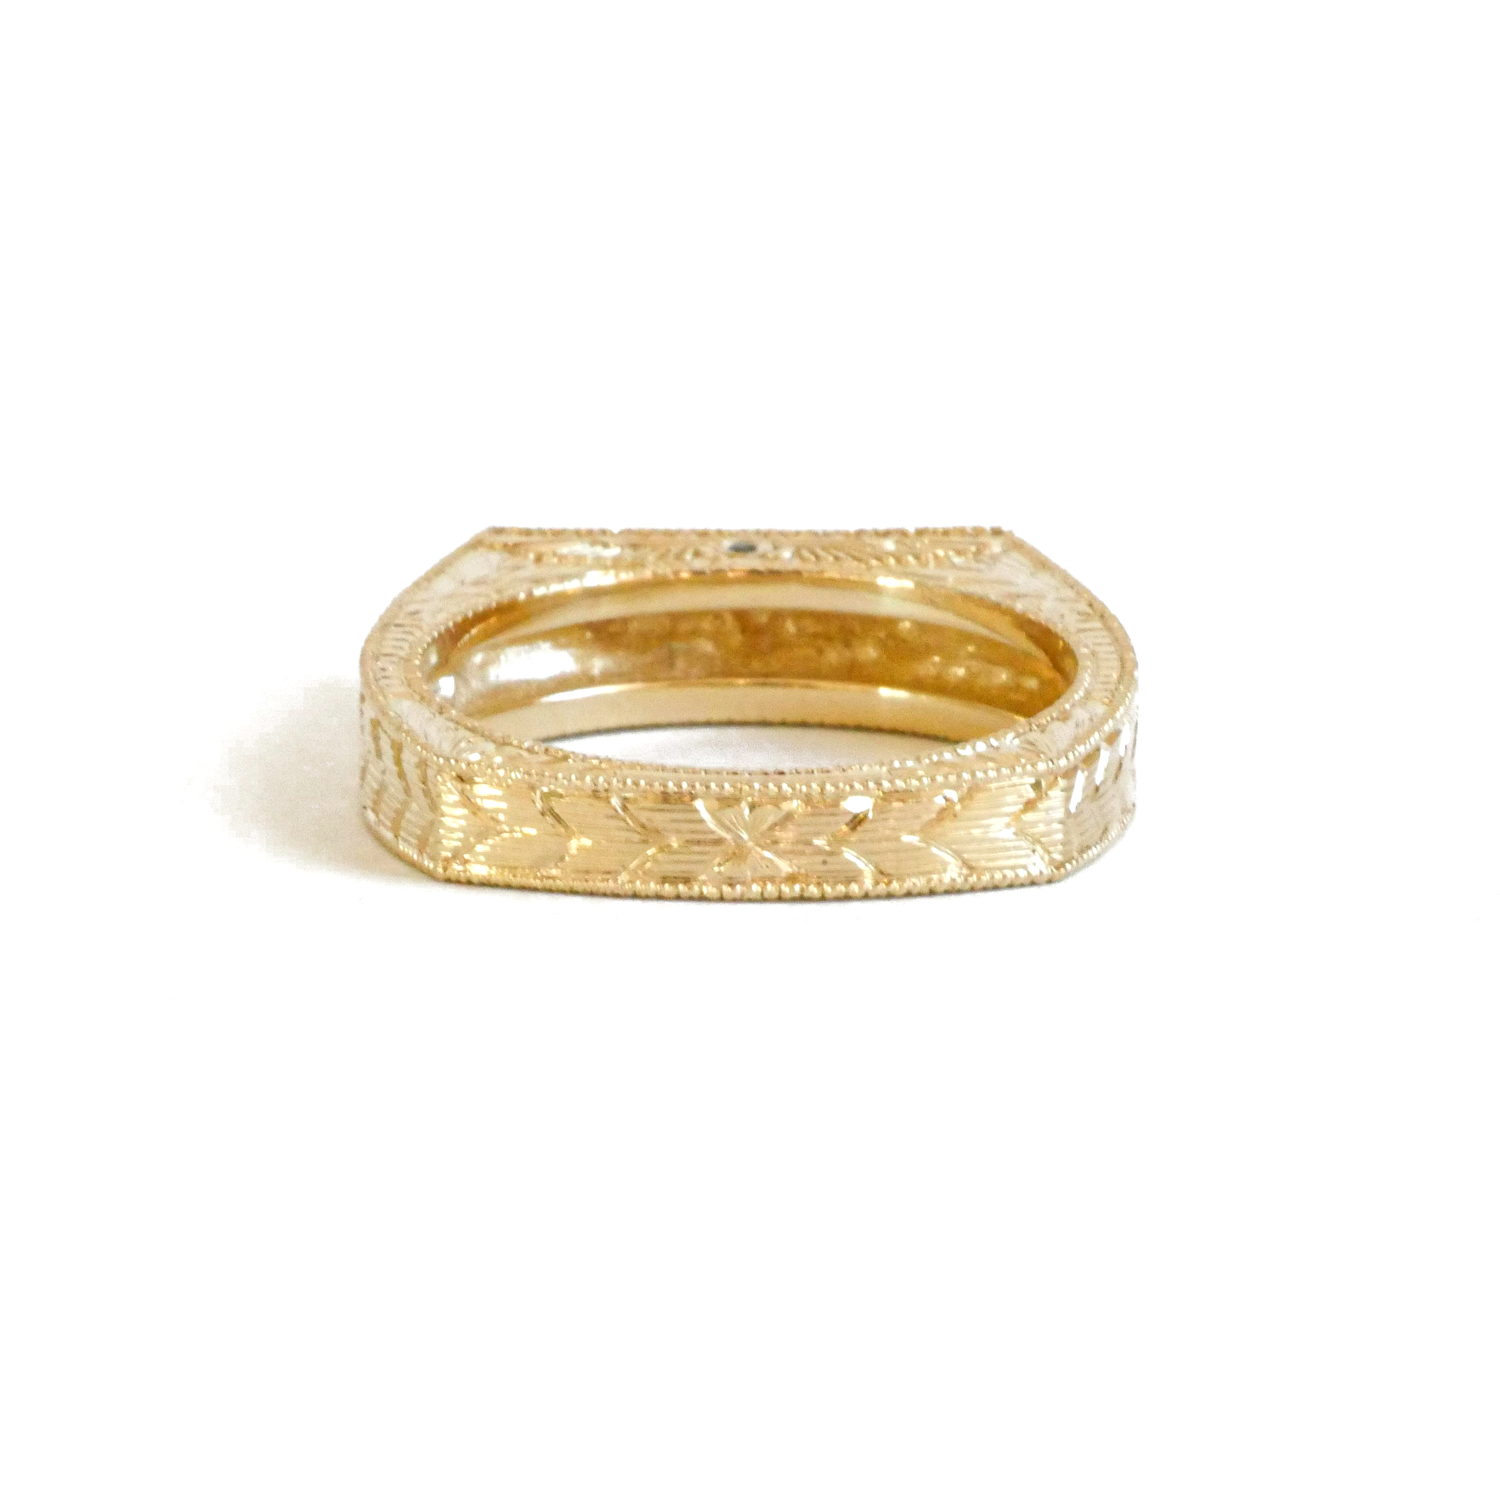 Gents Wide Two Tone Scroll Wedding Band in 14k Yellow and White Gold –  Charles Babb Designs